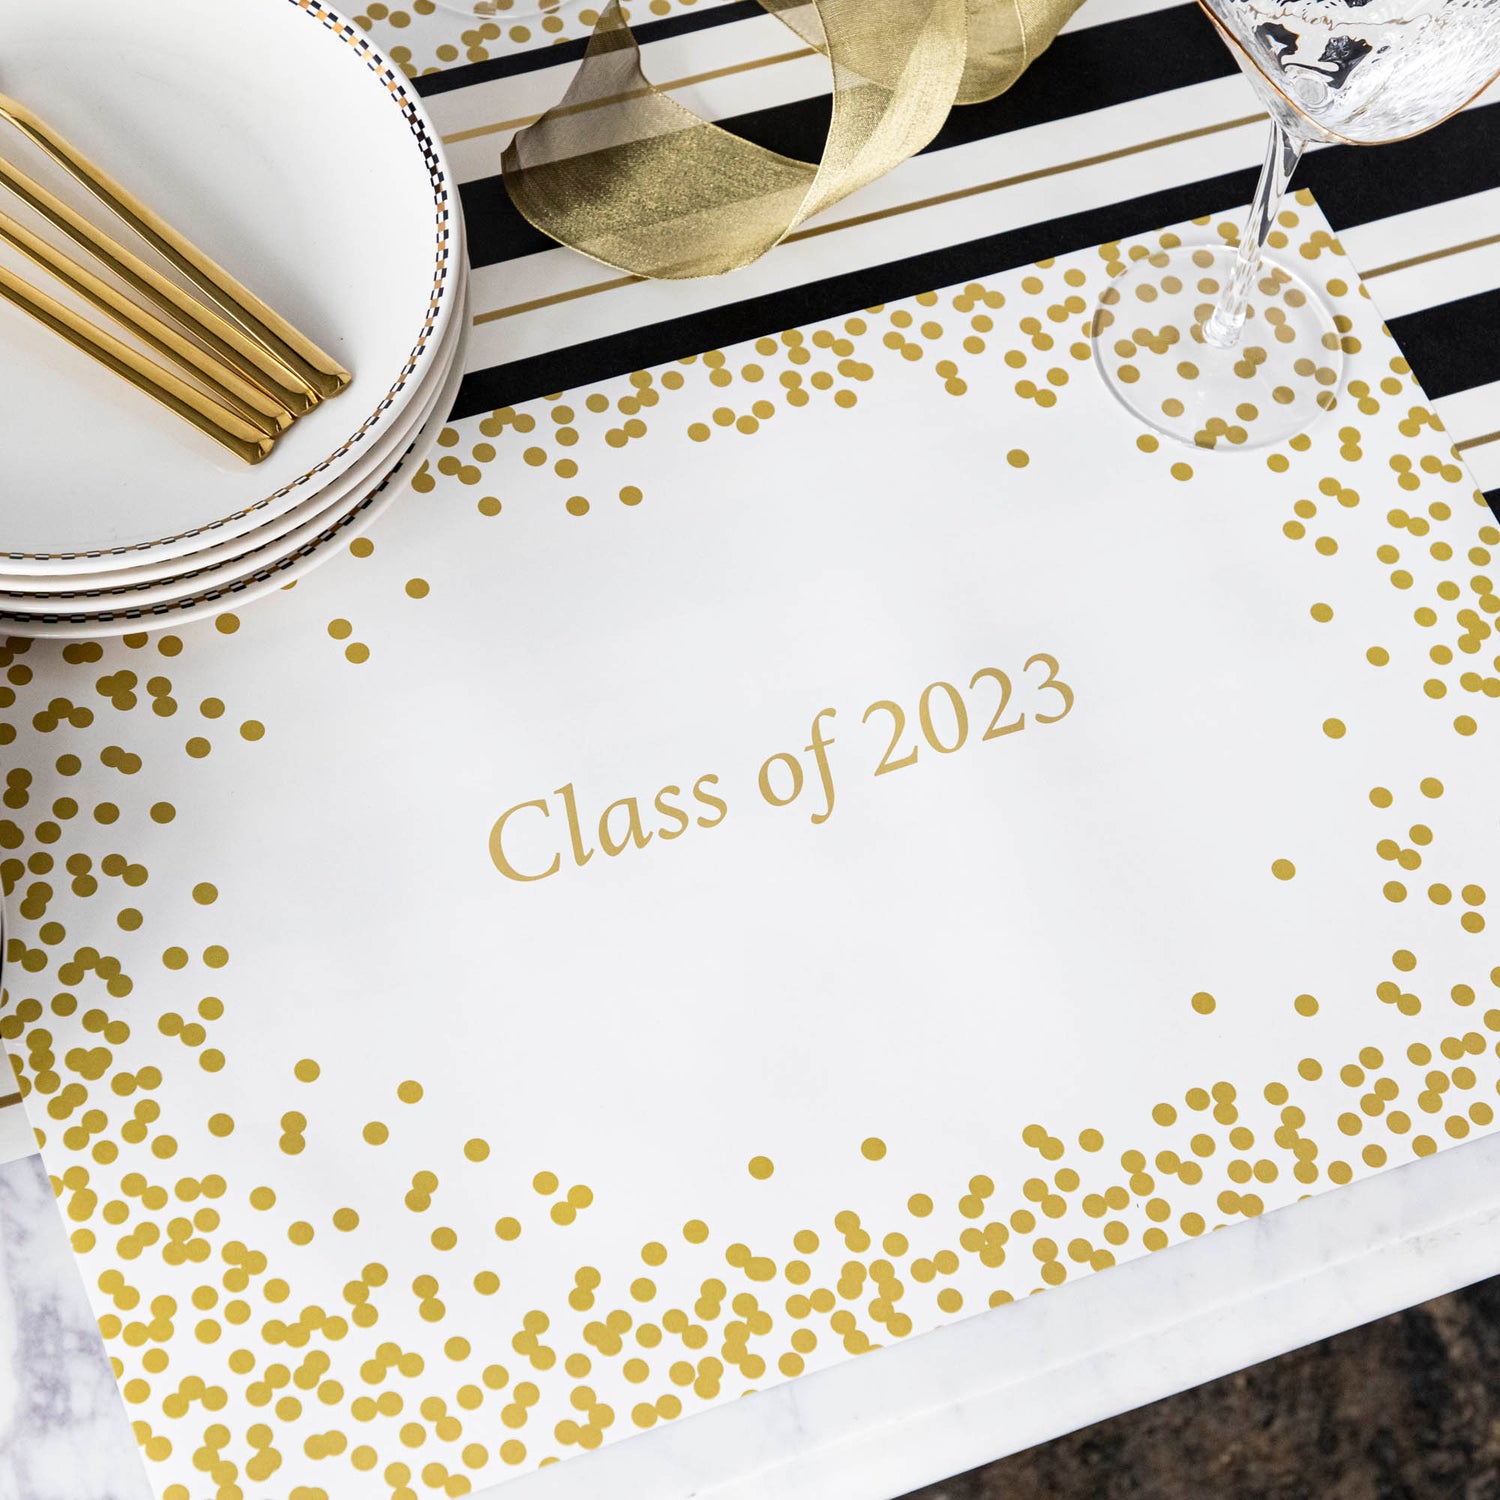 Table setting with Gold Confetti Placemat with personalized message printed in gold color: &quot;Class of 2023&quot;.